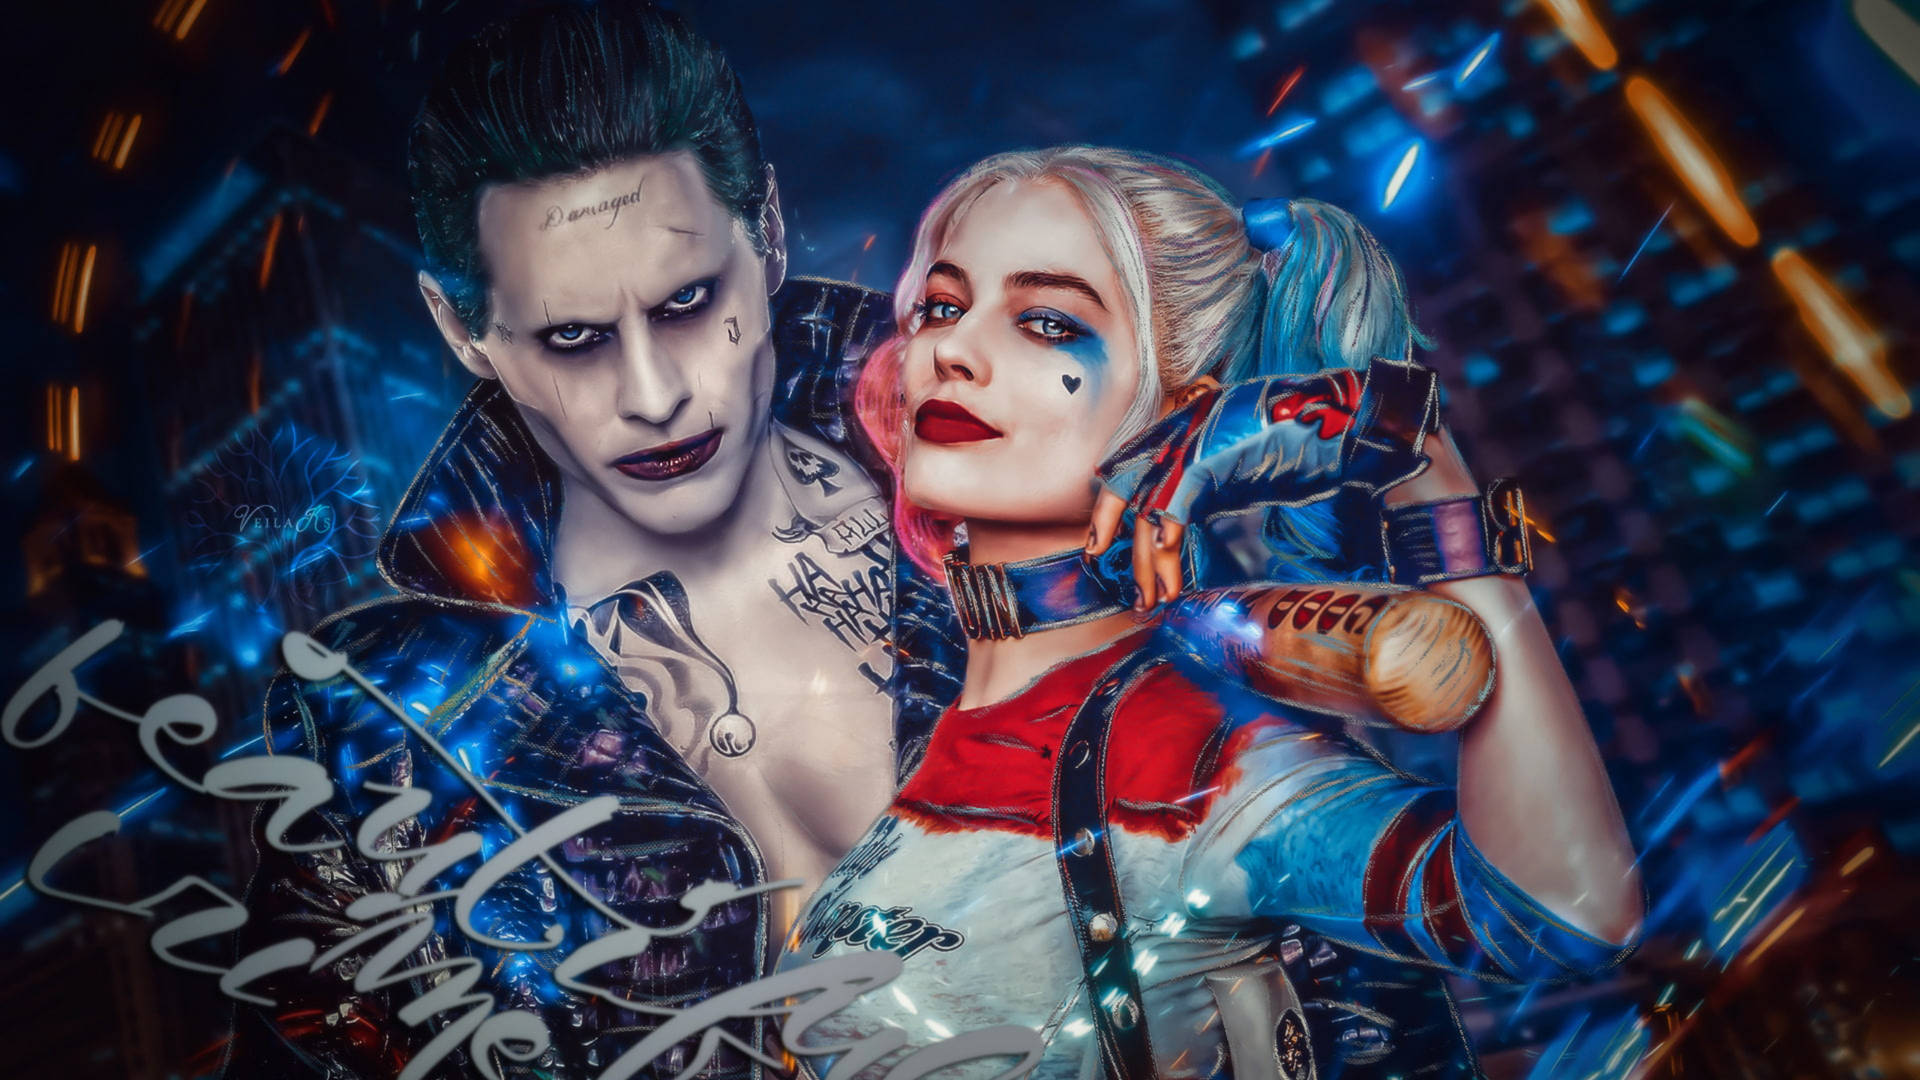 Joker And Harley Quinn The Suicide Squad Movie wallpaper